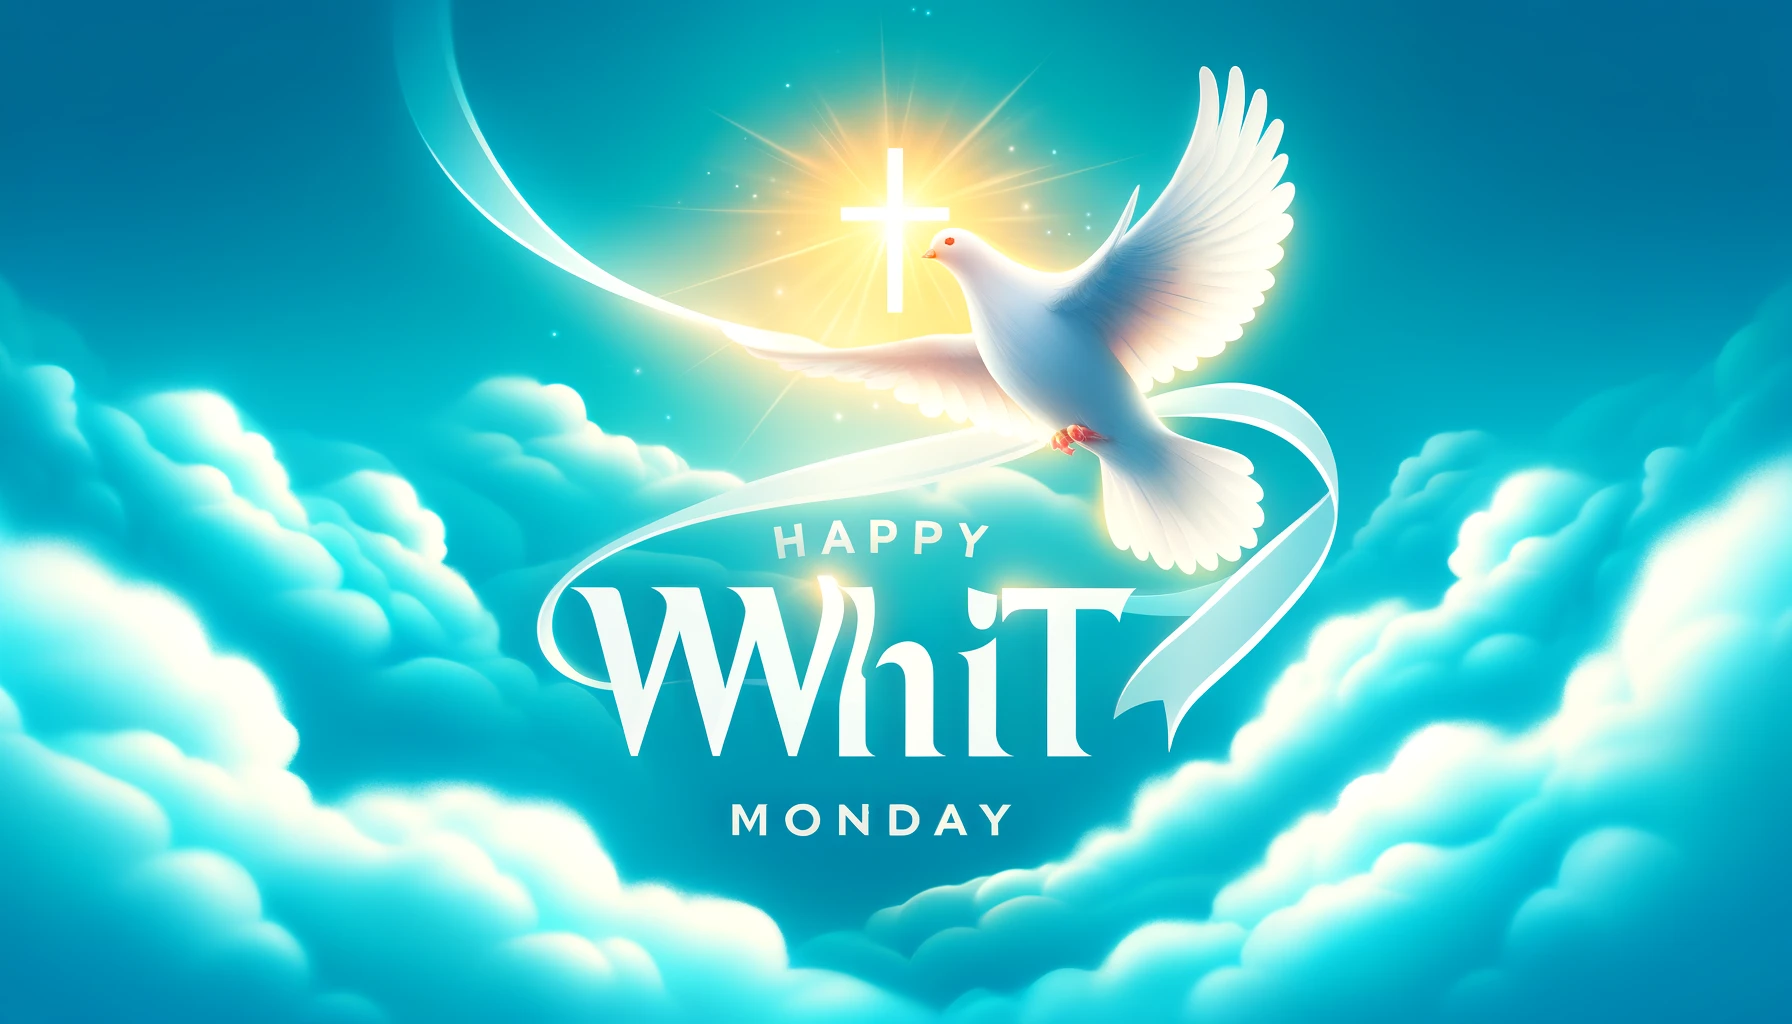 Deep Whit Monday Messages for Spiritual Sharing